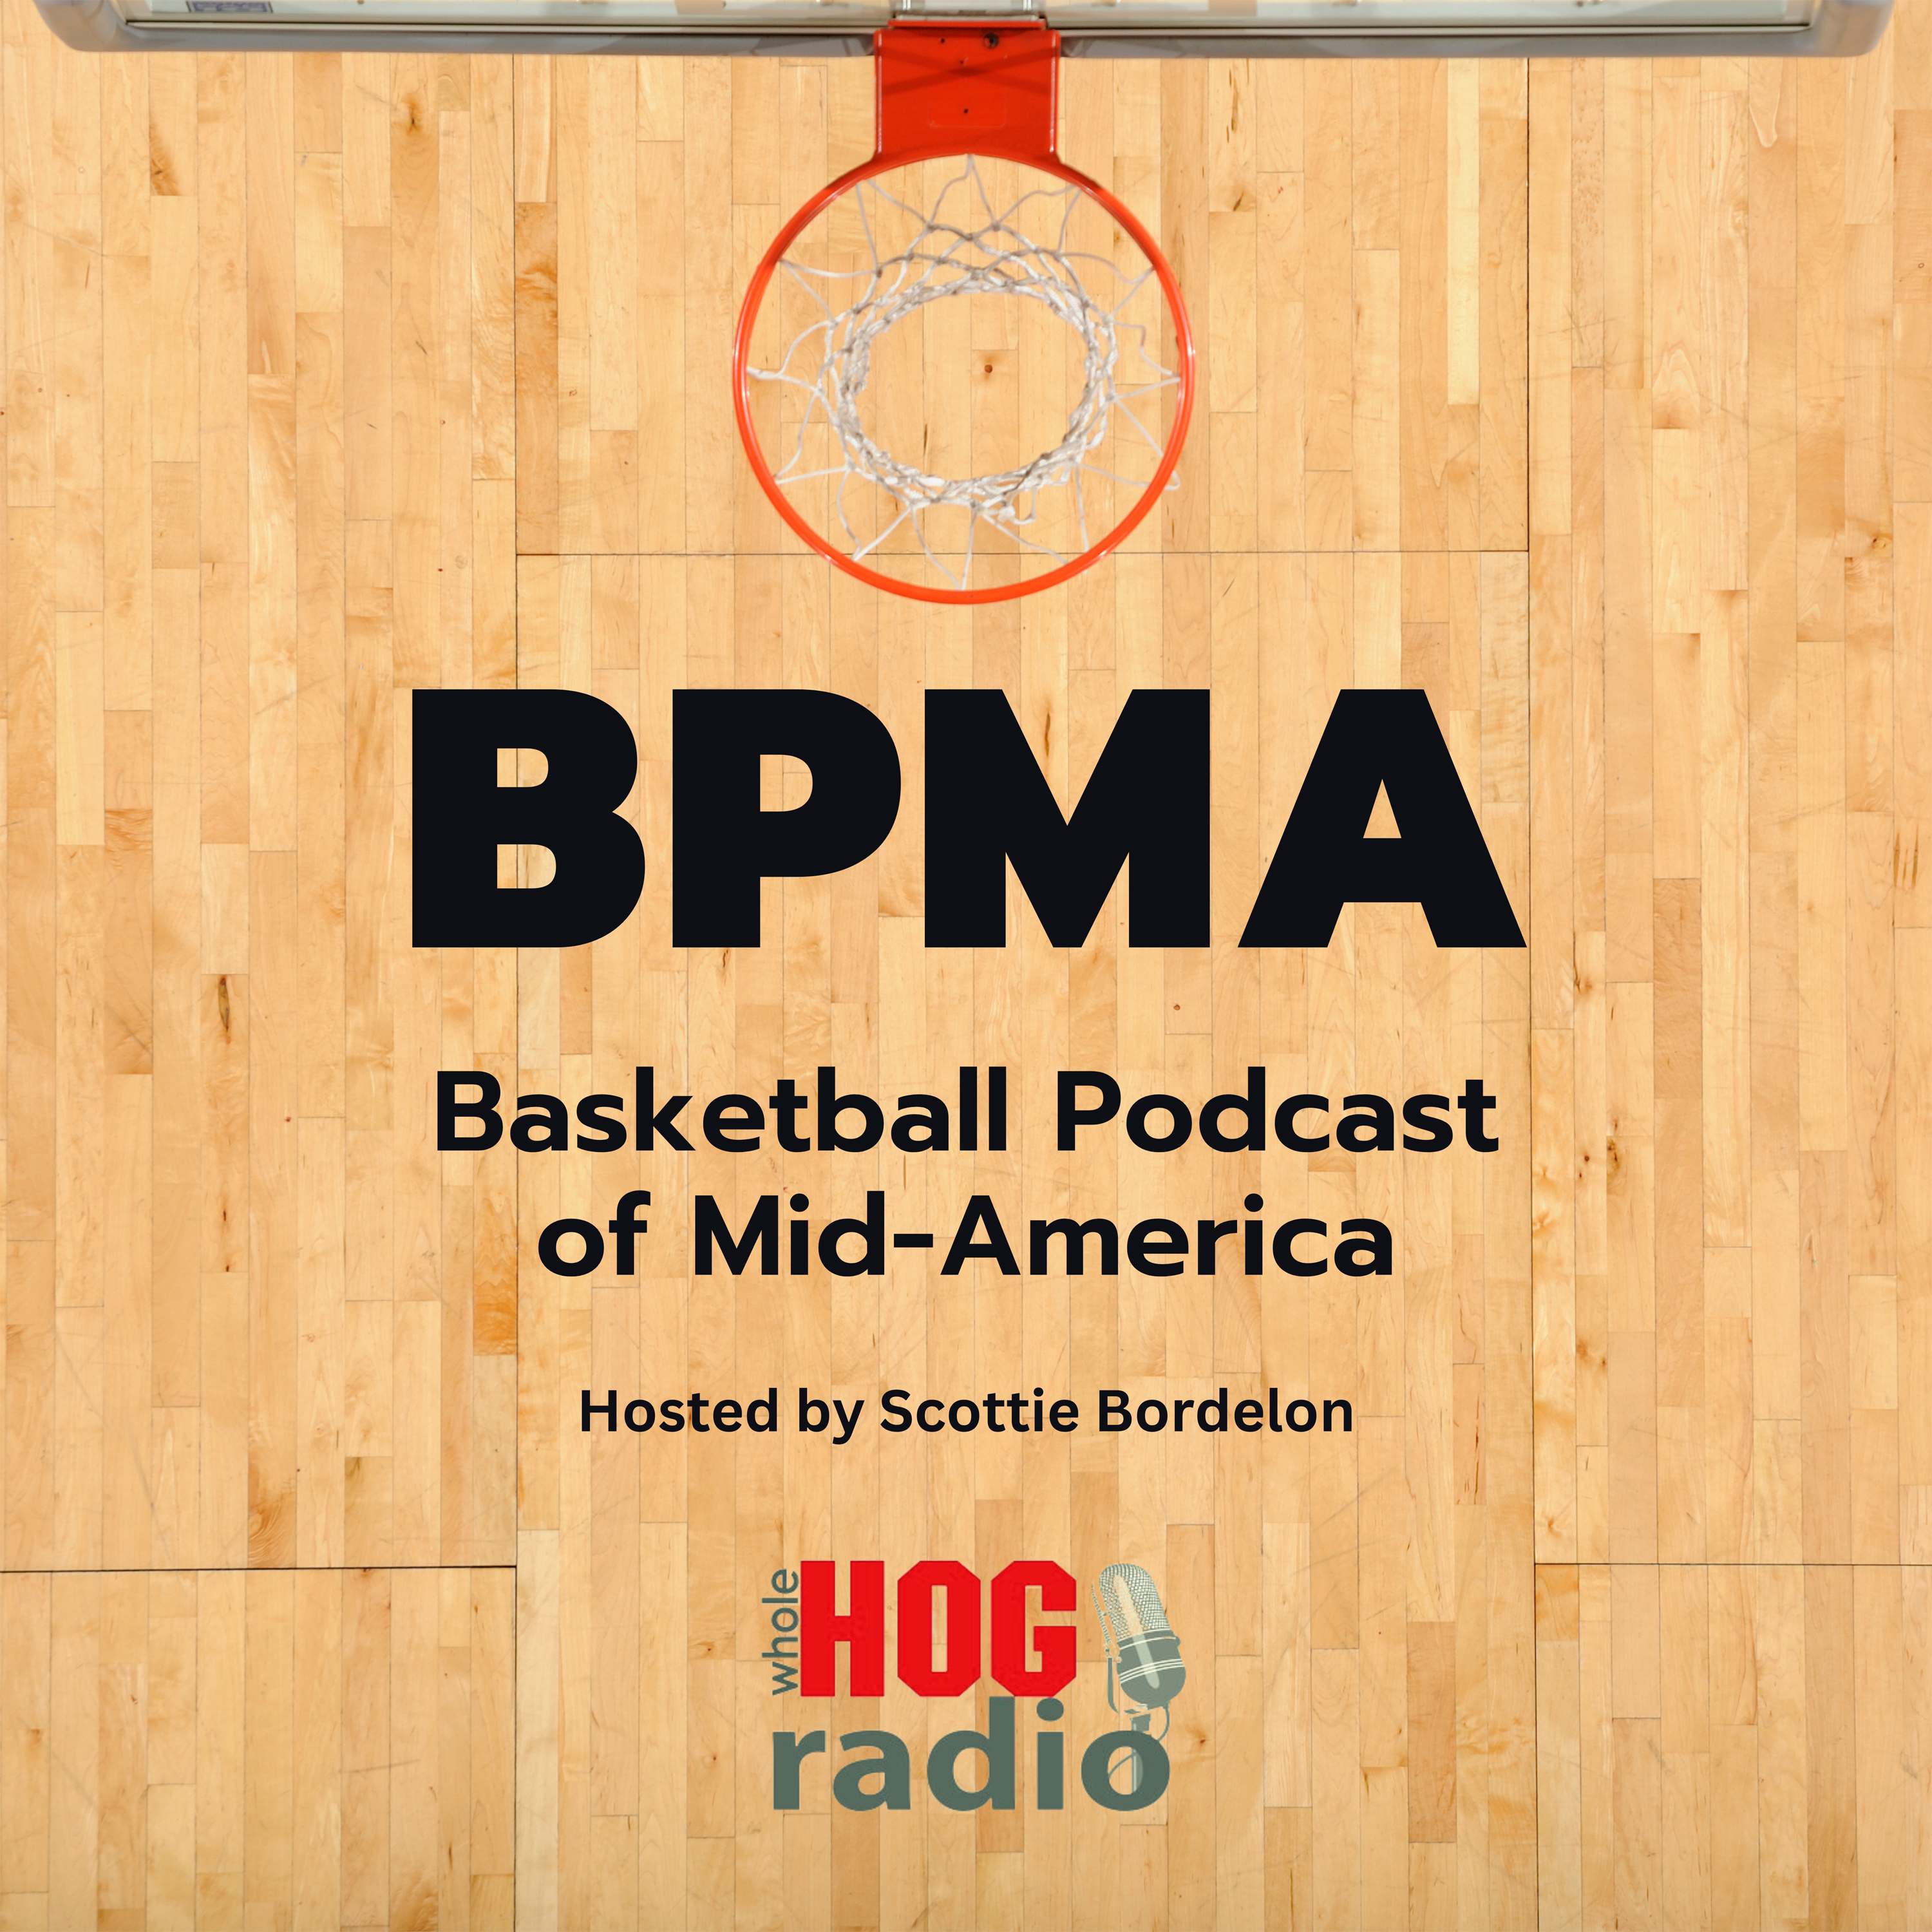 Basketball Podcast of Mid-America: The Airing of Grievances